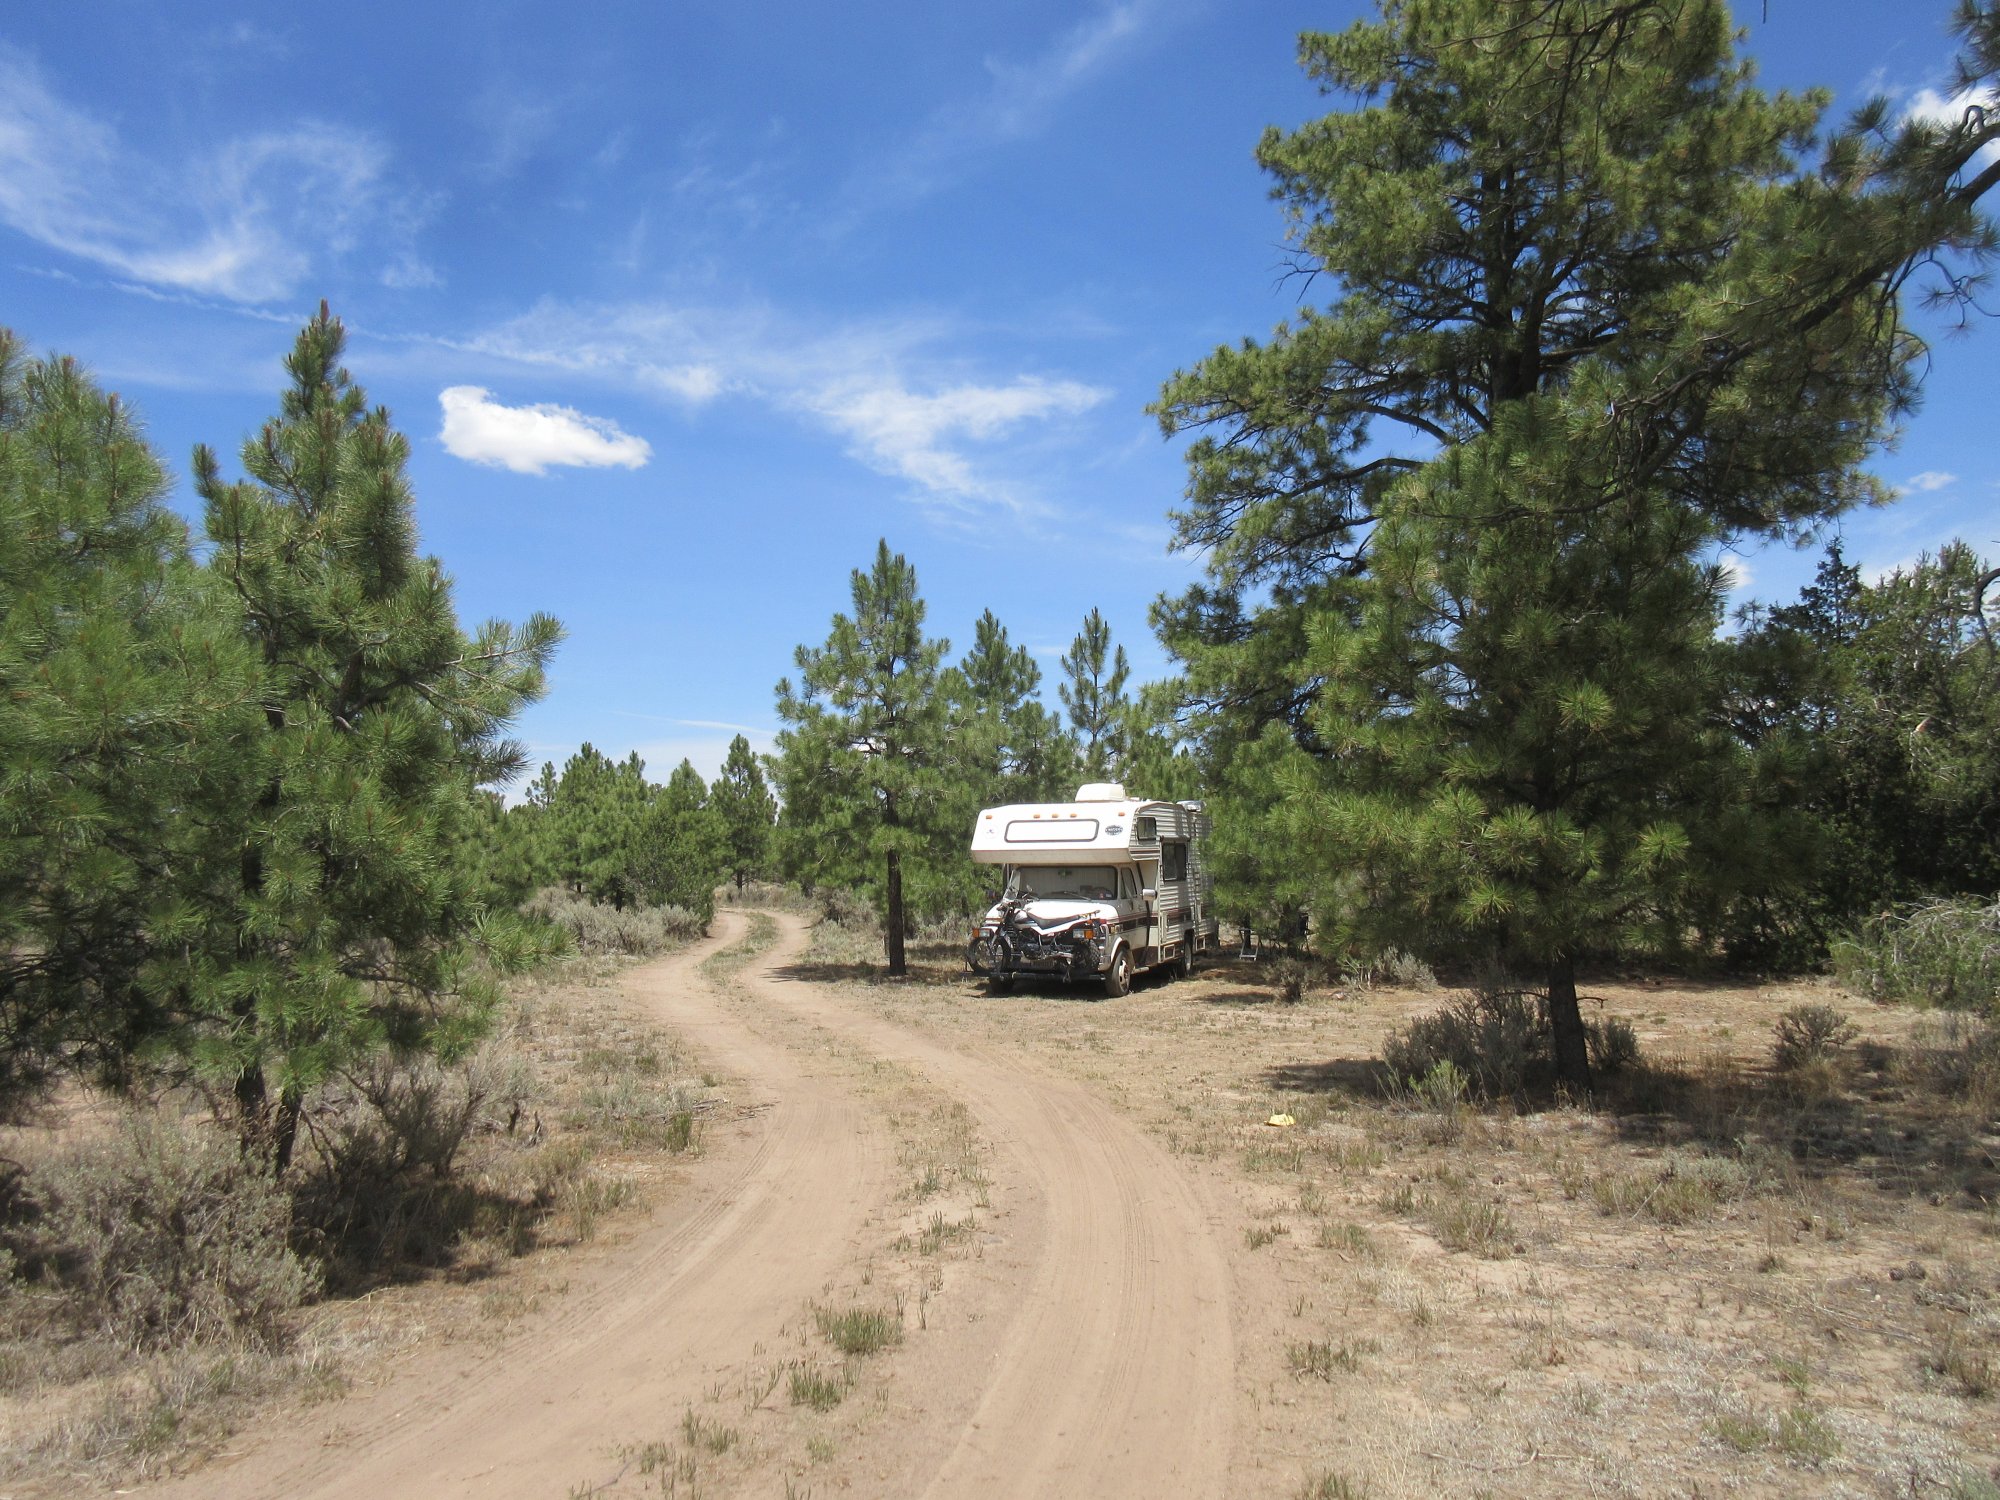 Protecting Our Public Lands: Escapees RV Club’s RVers Boondocking Policy 6